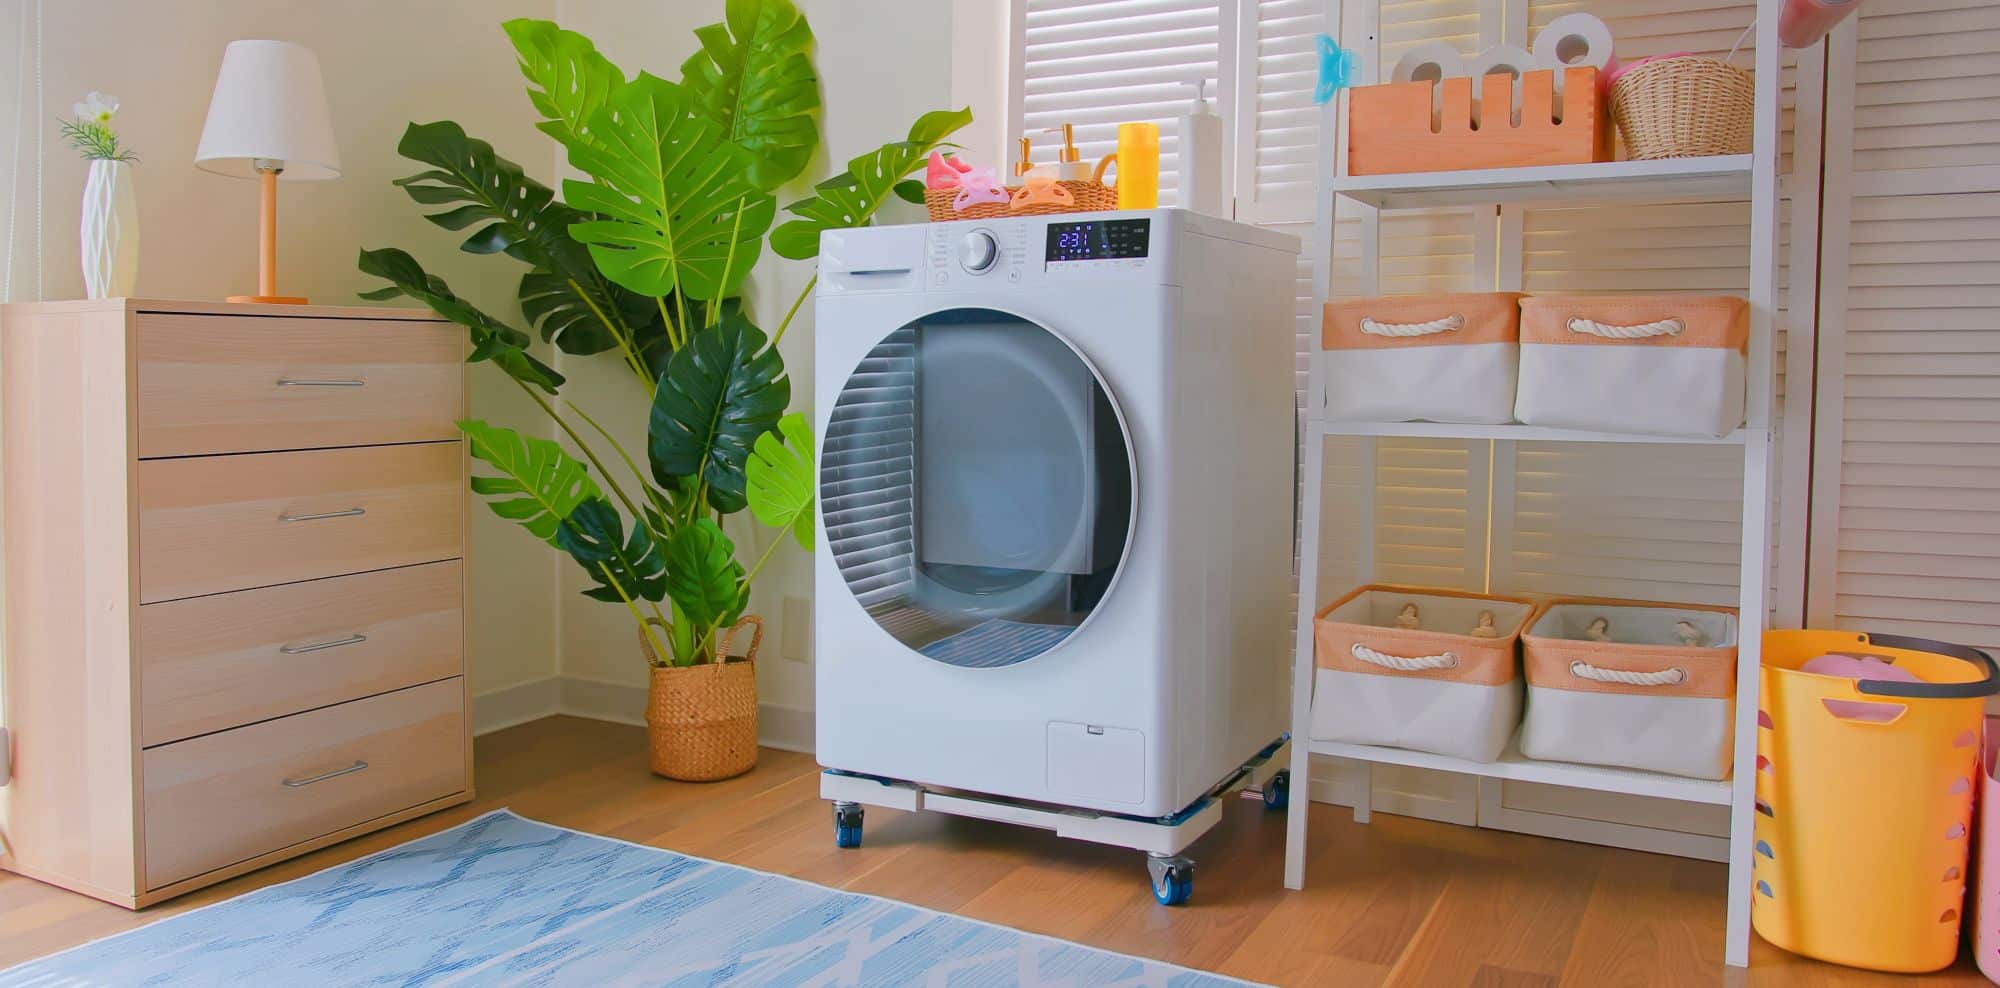 https://www.airtasker.com/blog/wp-content/uploads/2023/05/fabric-containers-laundry-storage.jpg